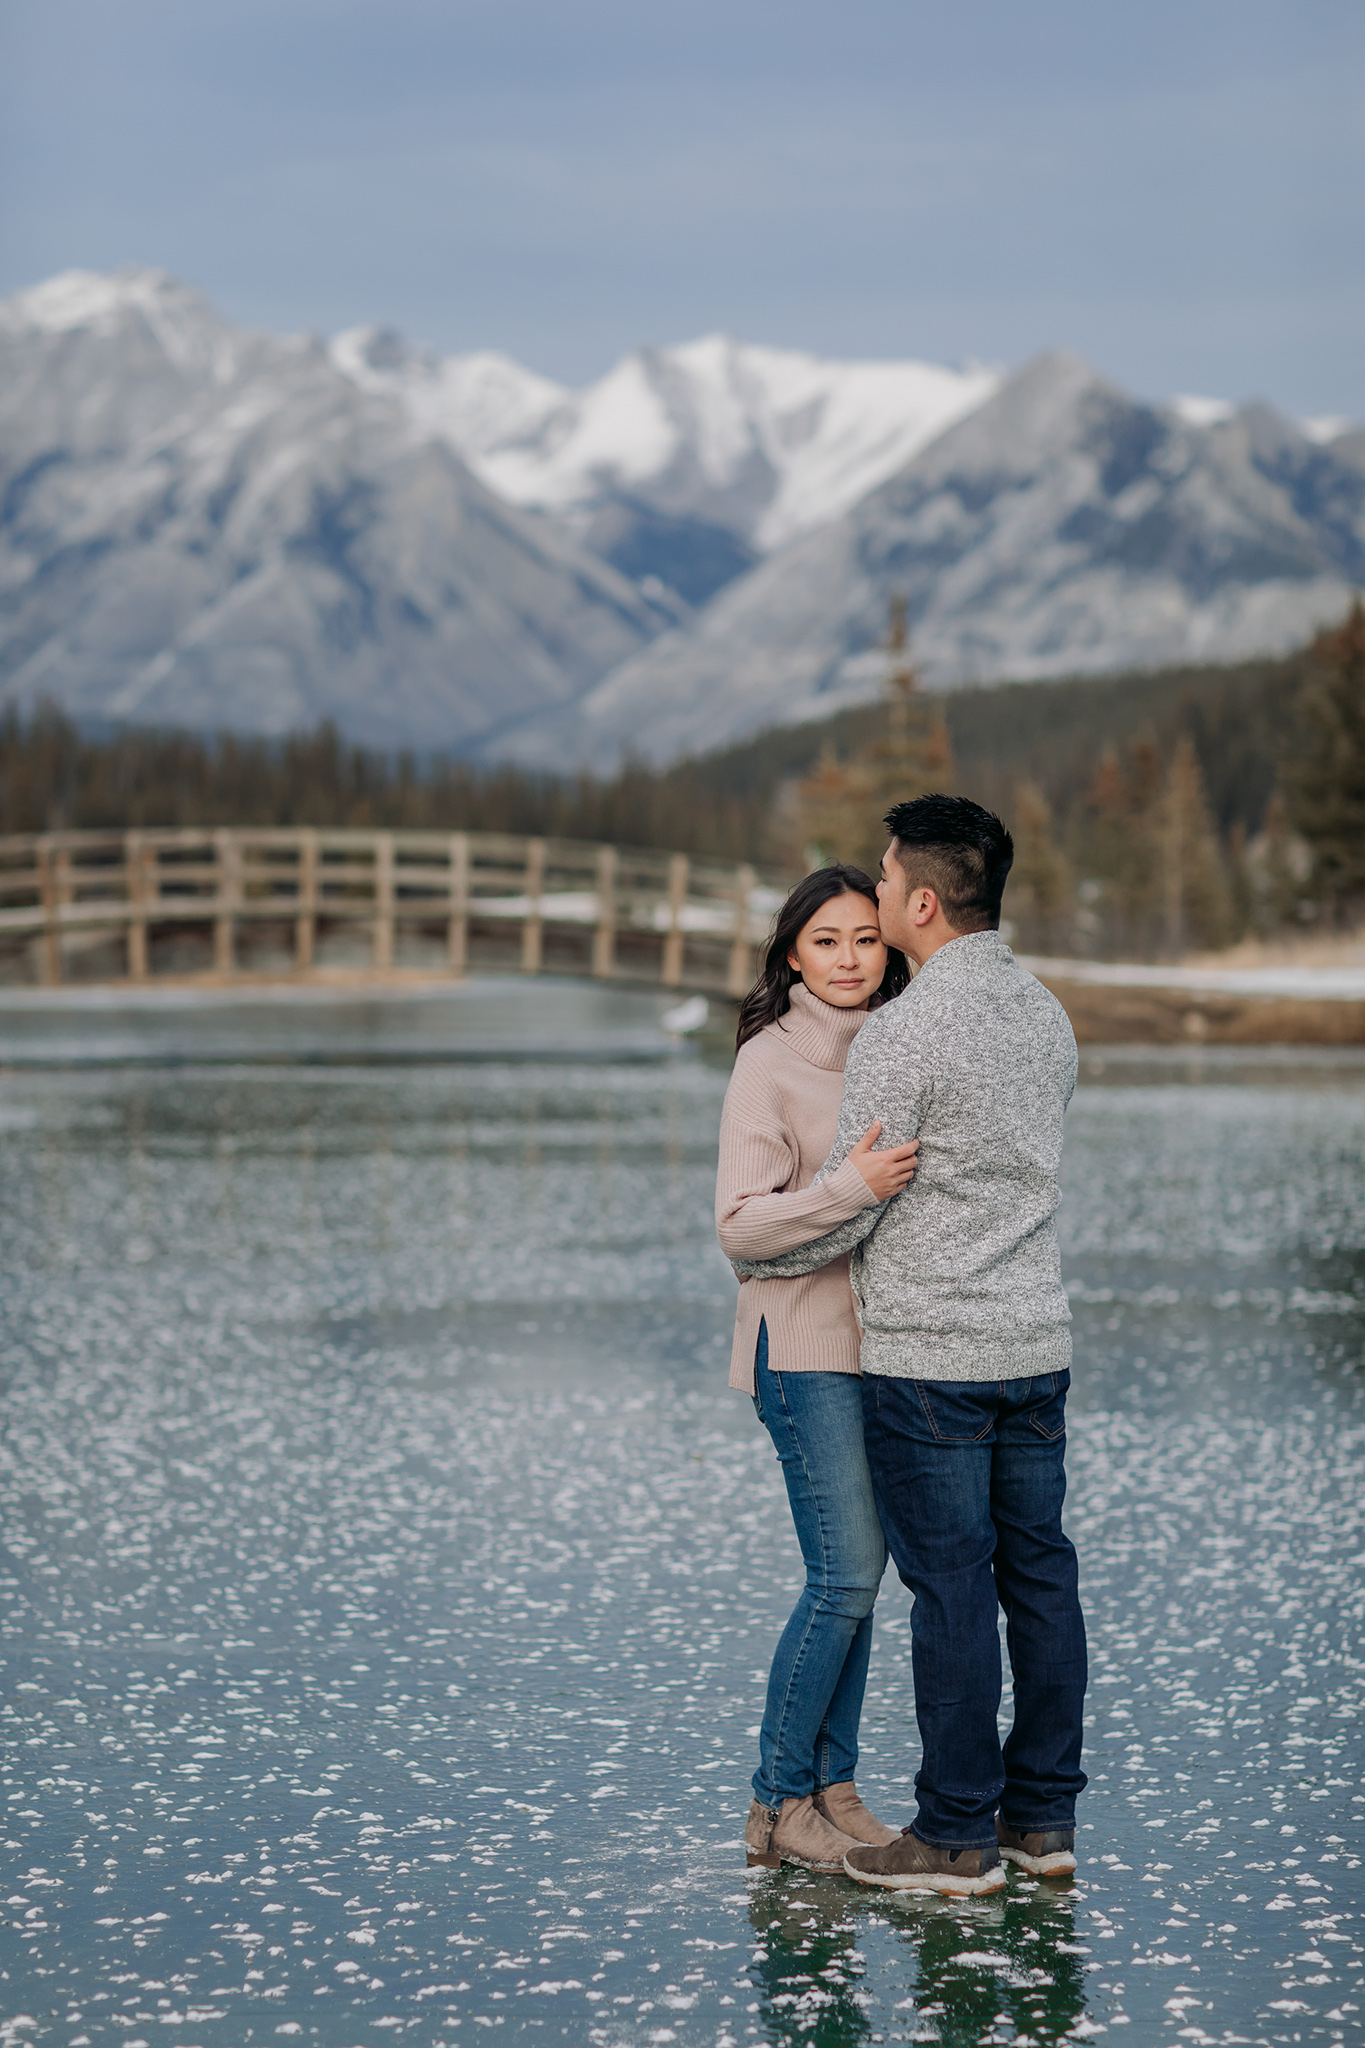 Banff National Park early winter November engagement session on a windy day at Cascade Ponds with rare frost flowers & green Ice